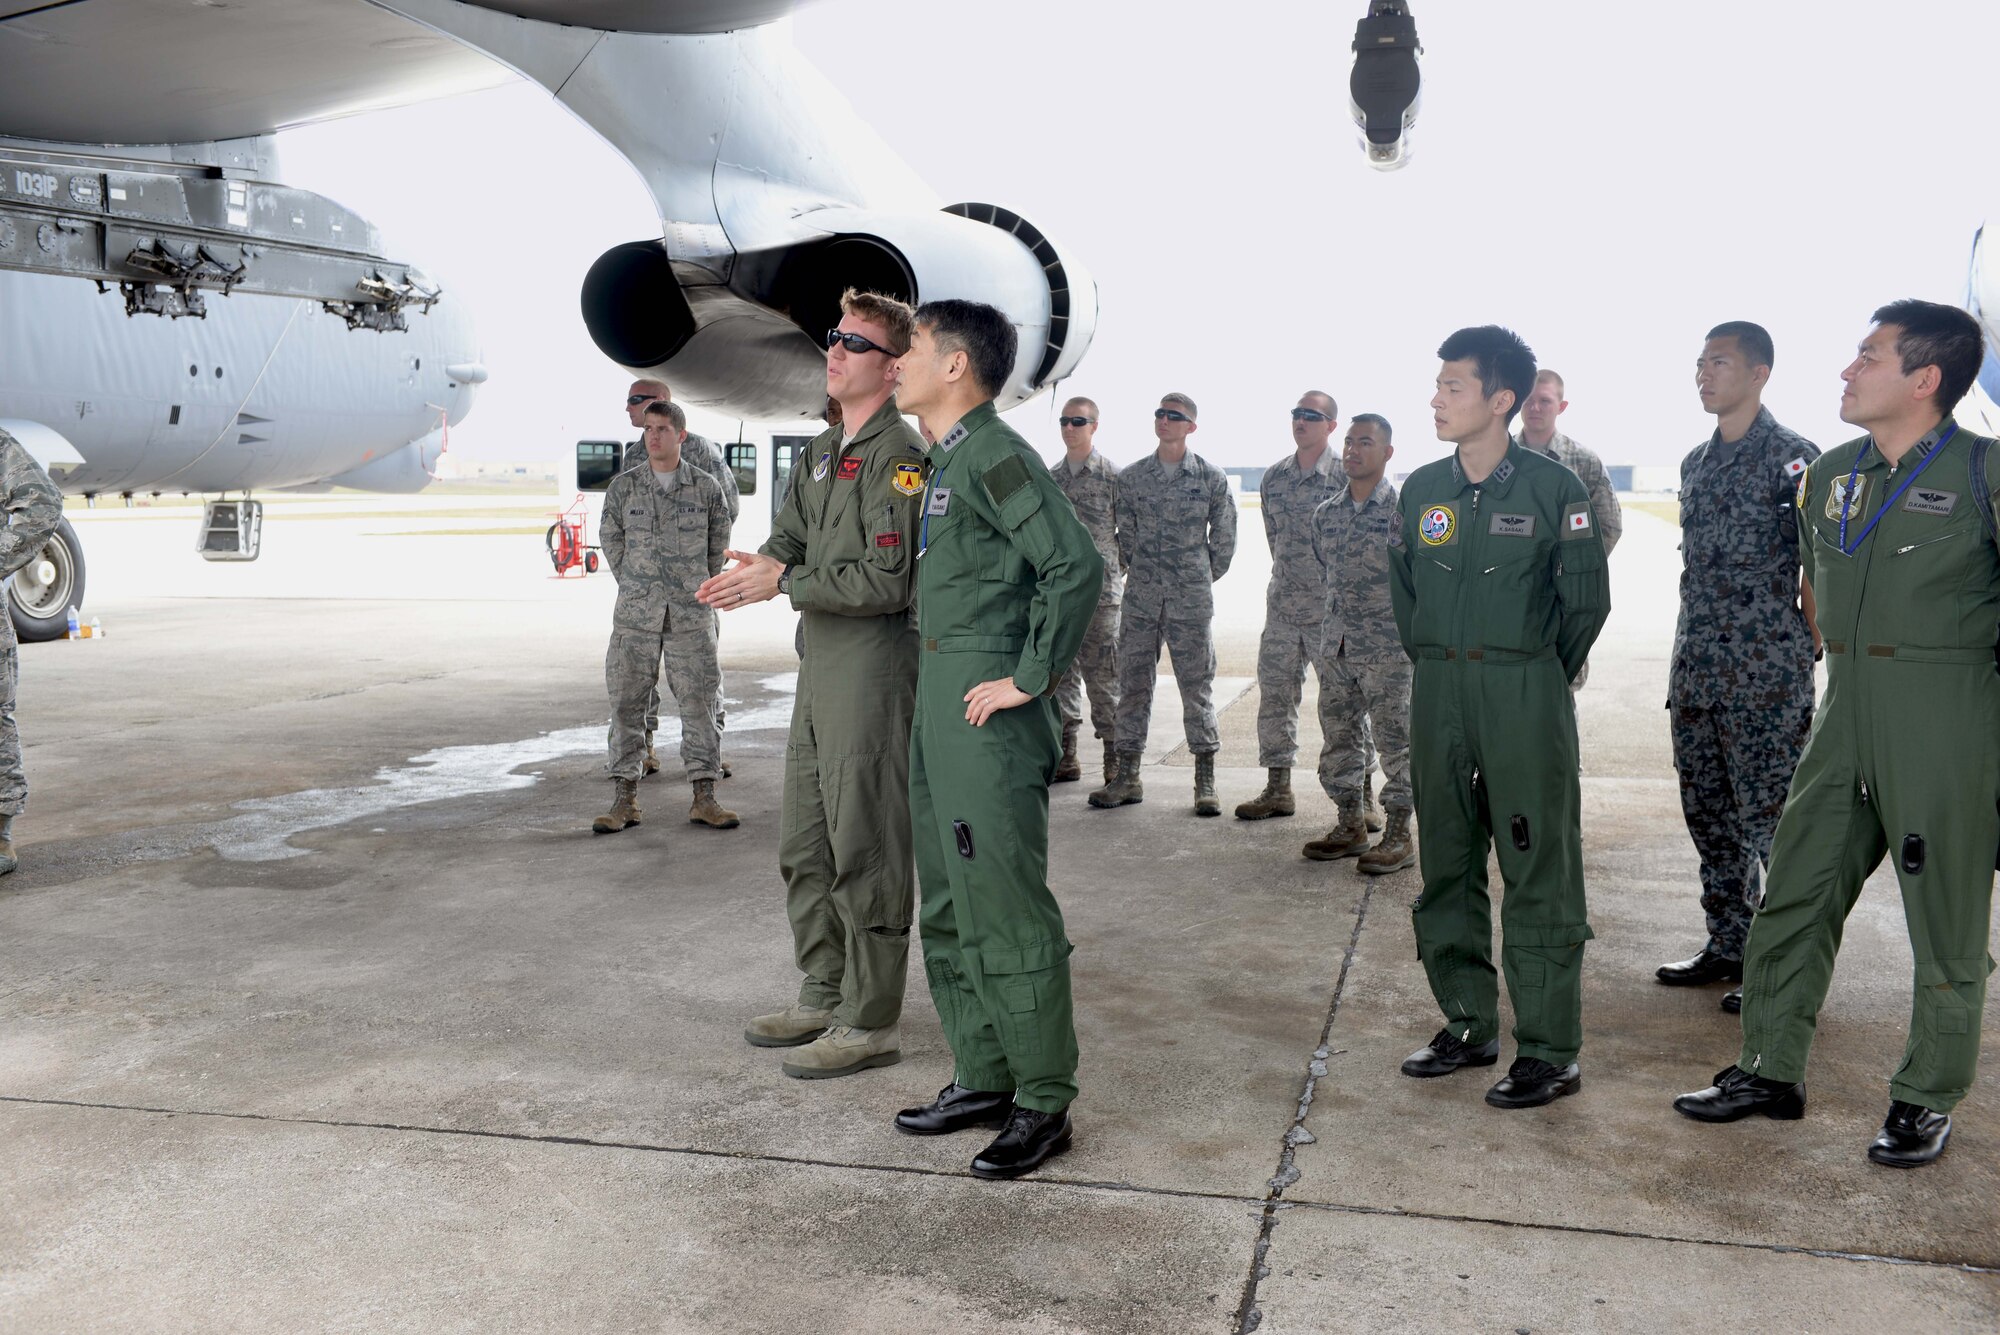 Lt. Gen. Yoshinari Marumo, Western Air Self-Defense Force commander, receives a briefing from B-52 Stratofortress pilots and crewchiefs on the aircraft during a tour of the base Feb. 19, 2015, at Andersen Air Force Base, Guam. The Japan Air Self-Defense Force has approximately 20 different aircraft deployed here in support of Cope North 2015, a multilateral training exercise which is a long-standing, multinational event designed to increase interoperability and improve combat readiness and develop a synergistic disaster response capability between the countries involved. (U.S. Air Force photo by Senior Airman Cierra Presentado/Released)